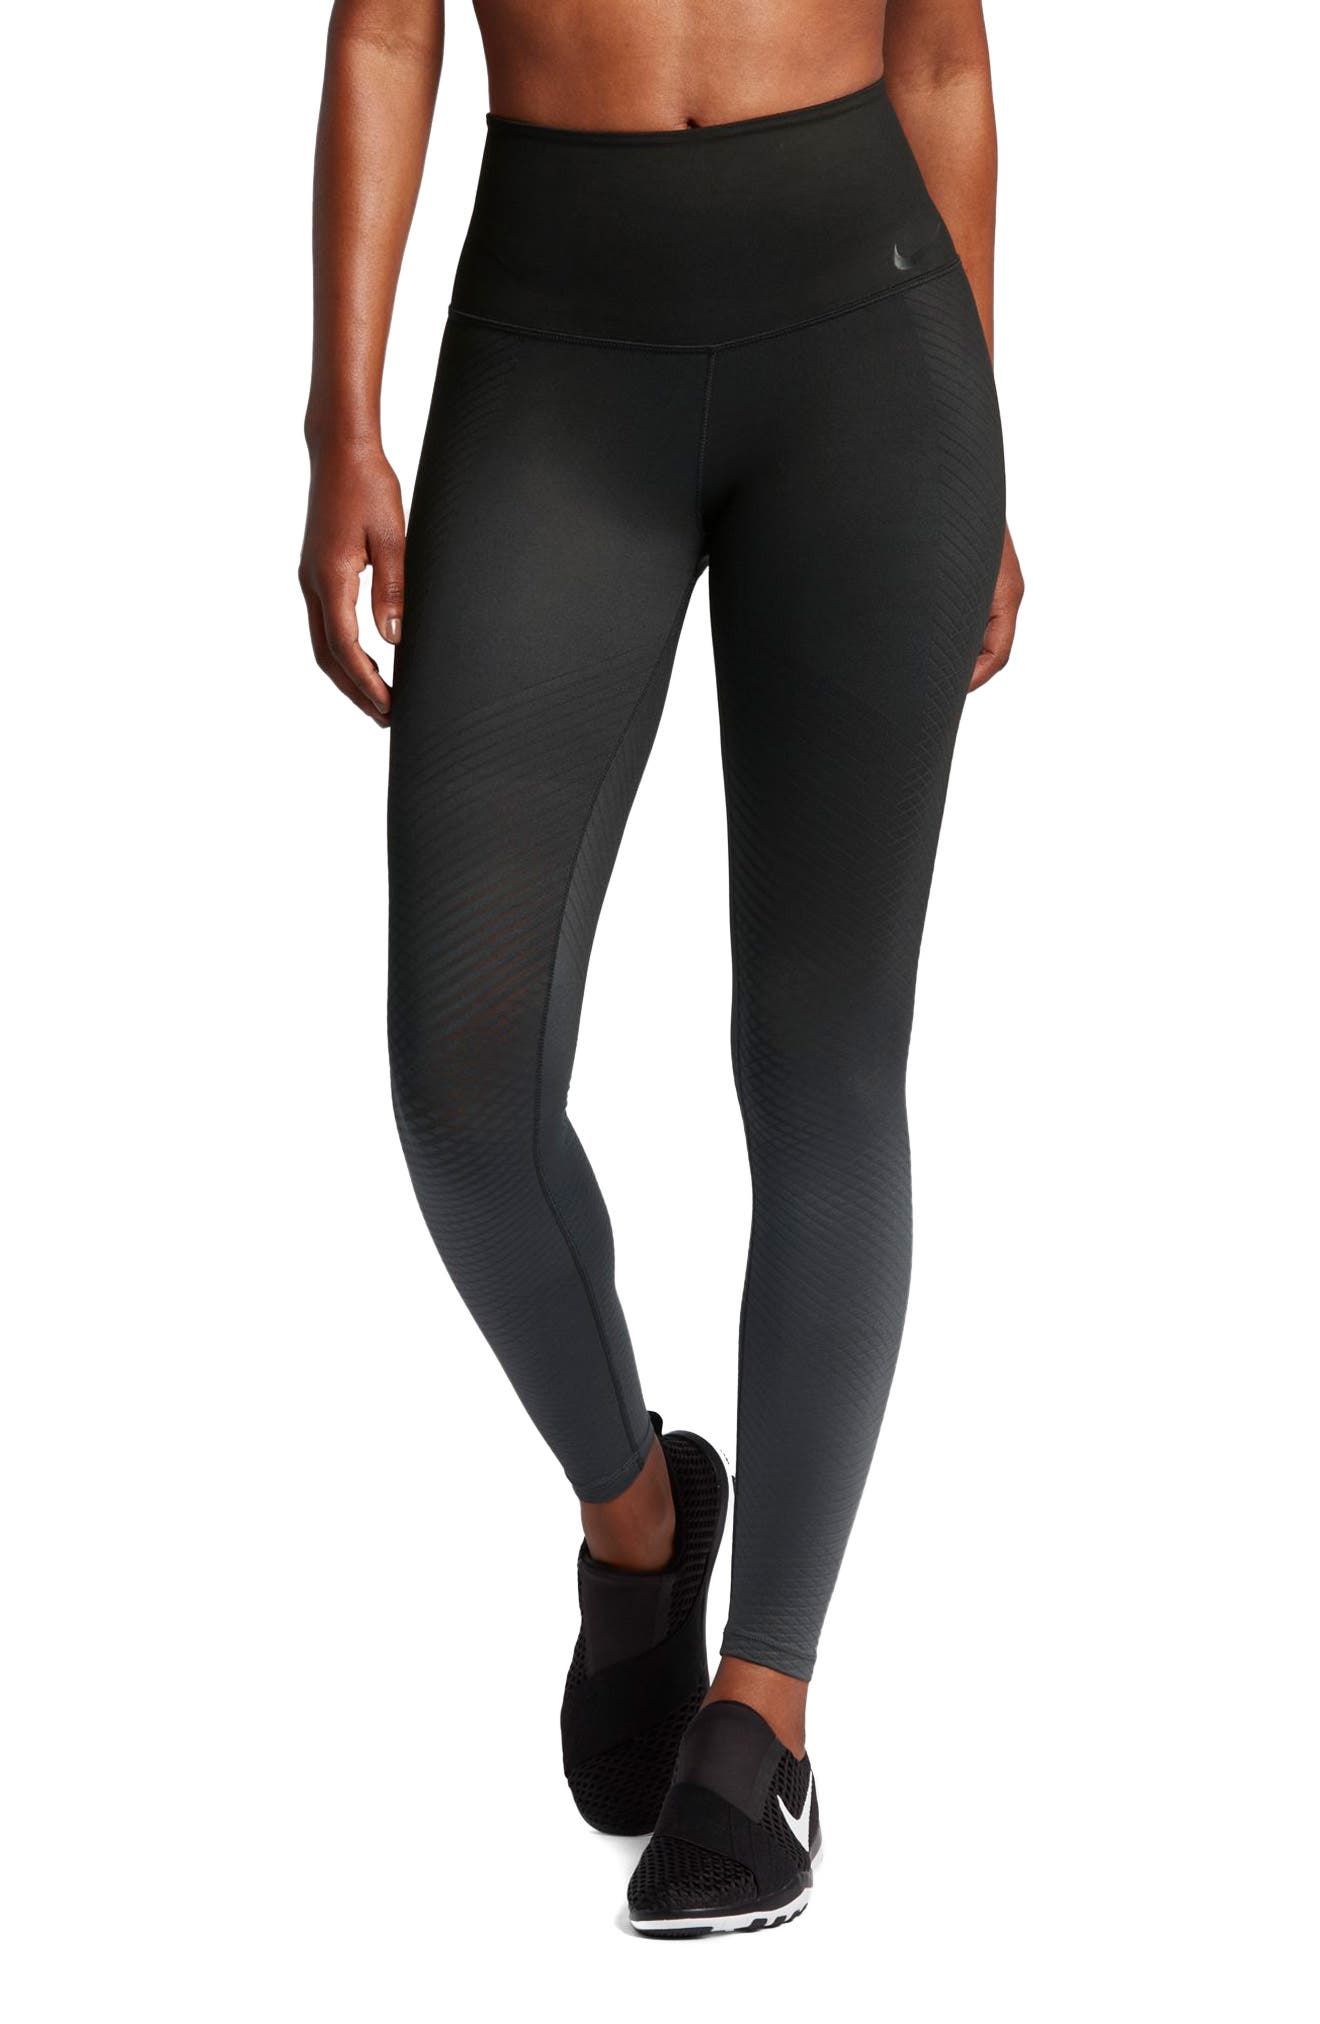 nike zonal strength tights mens